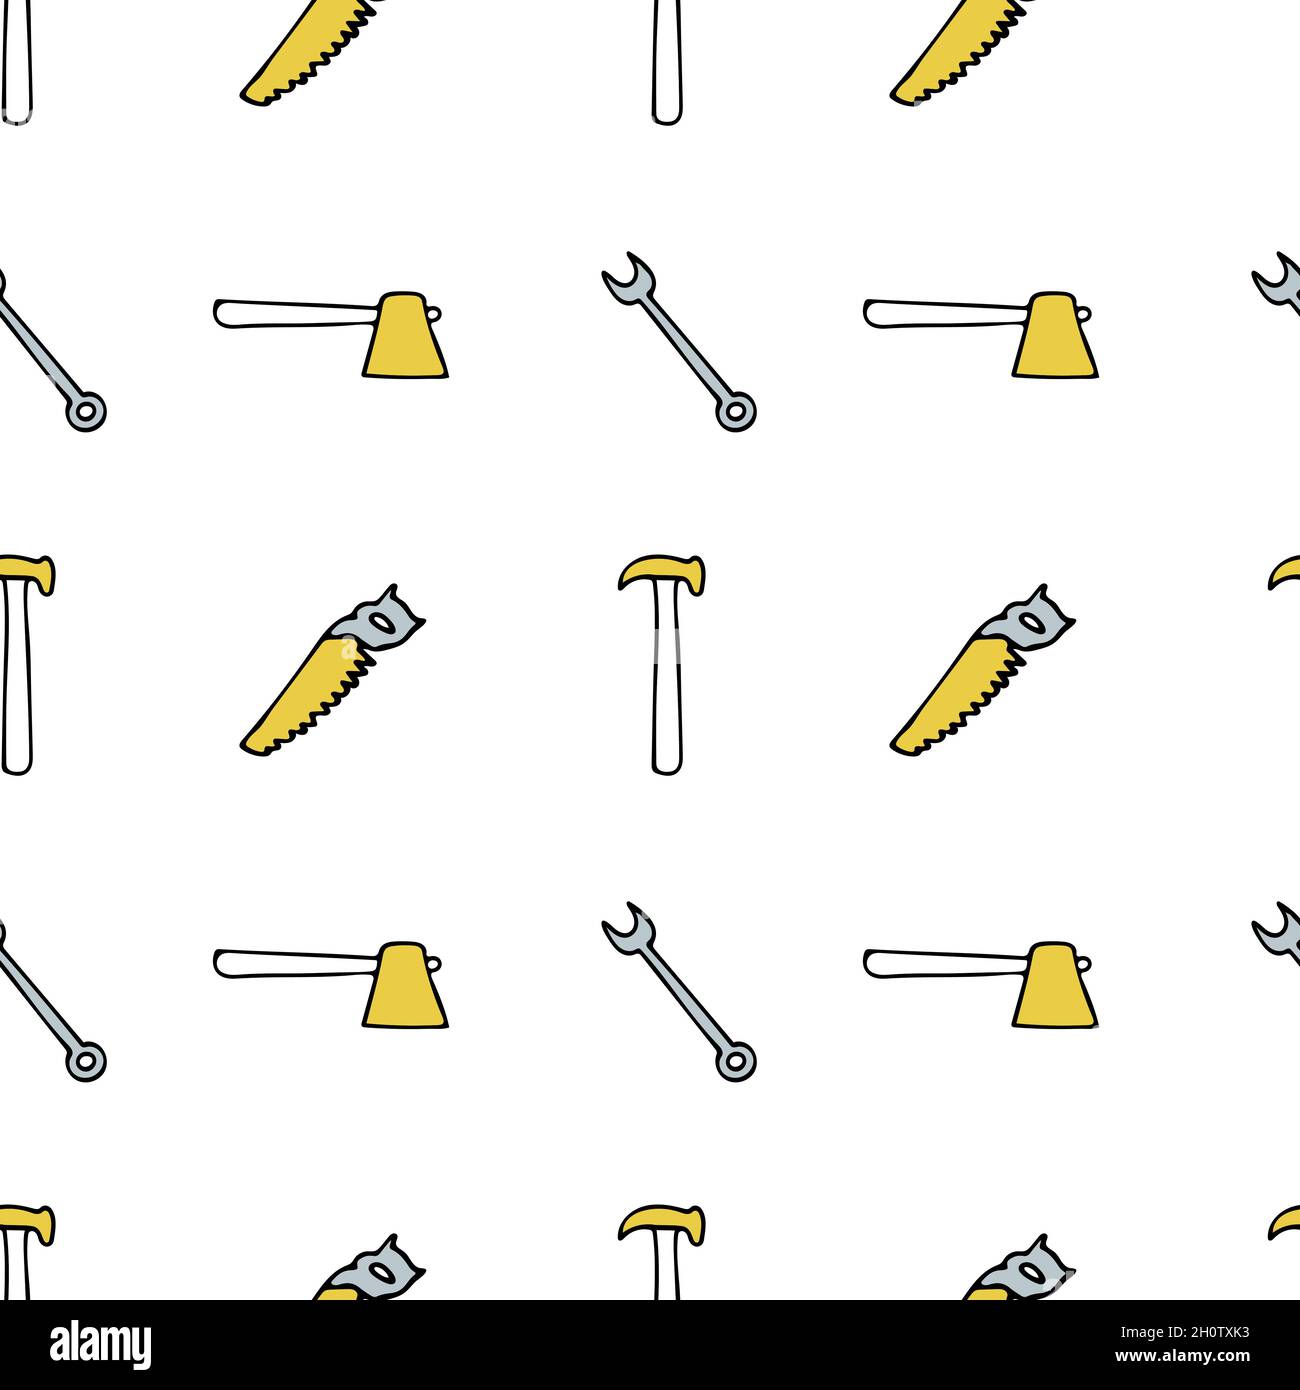 Seamless pattern with repair tools, hatchet, ax, pliers, saw, box wrench.  Stock Vector